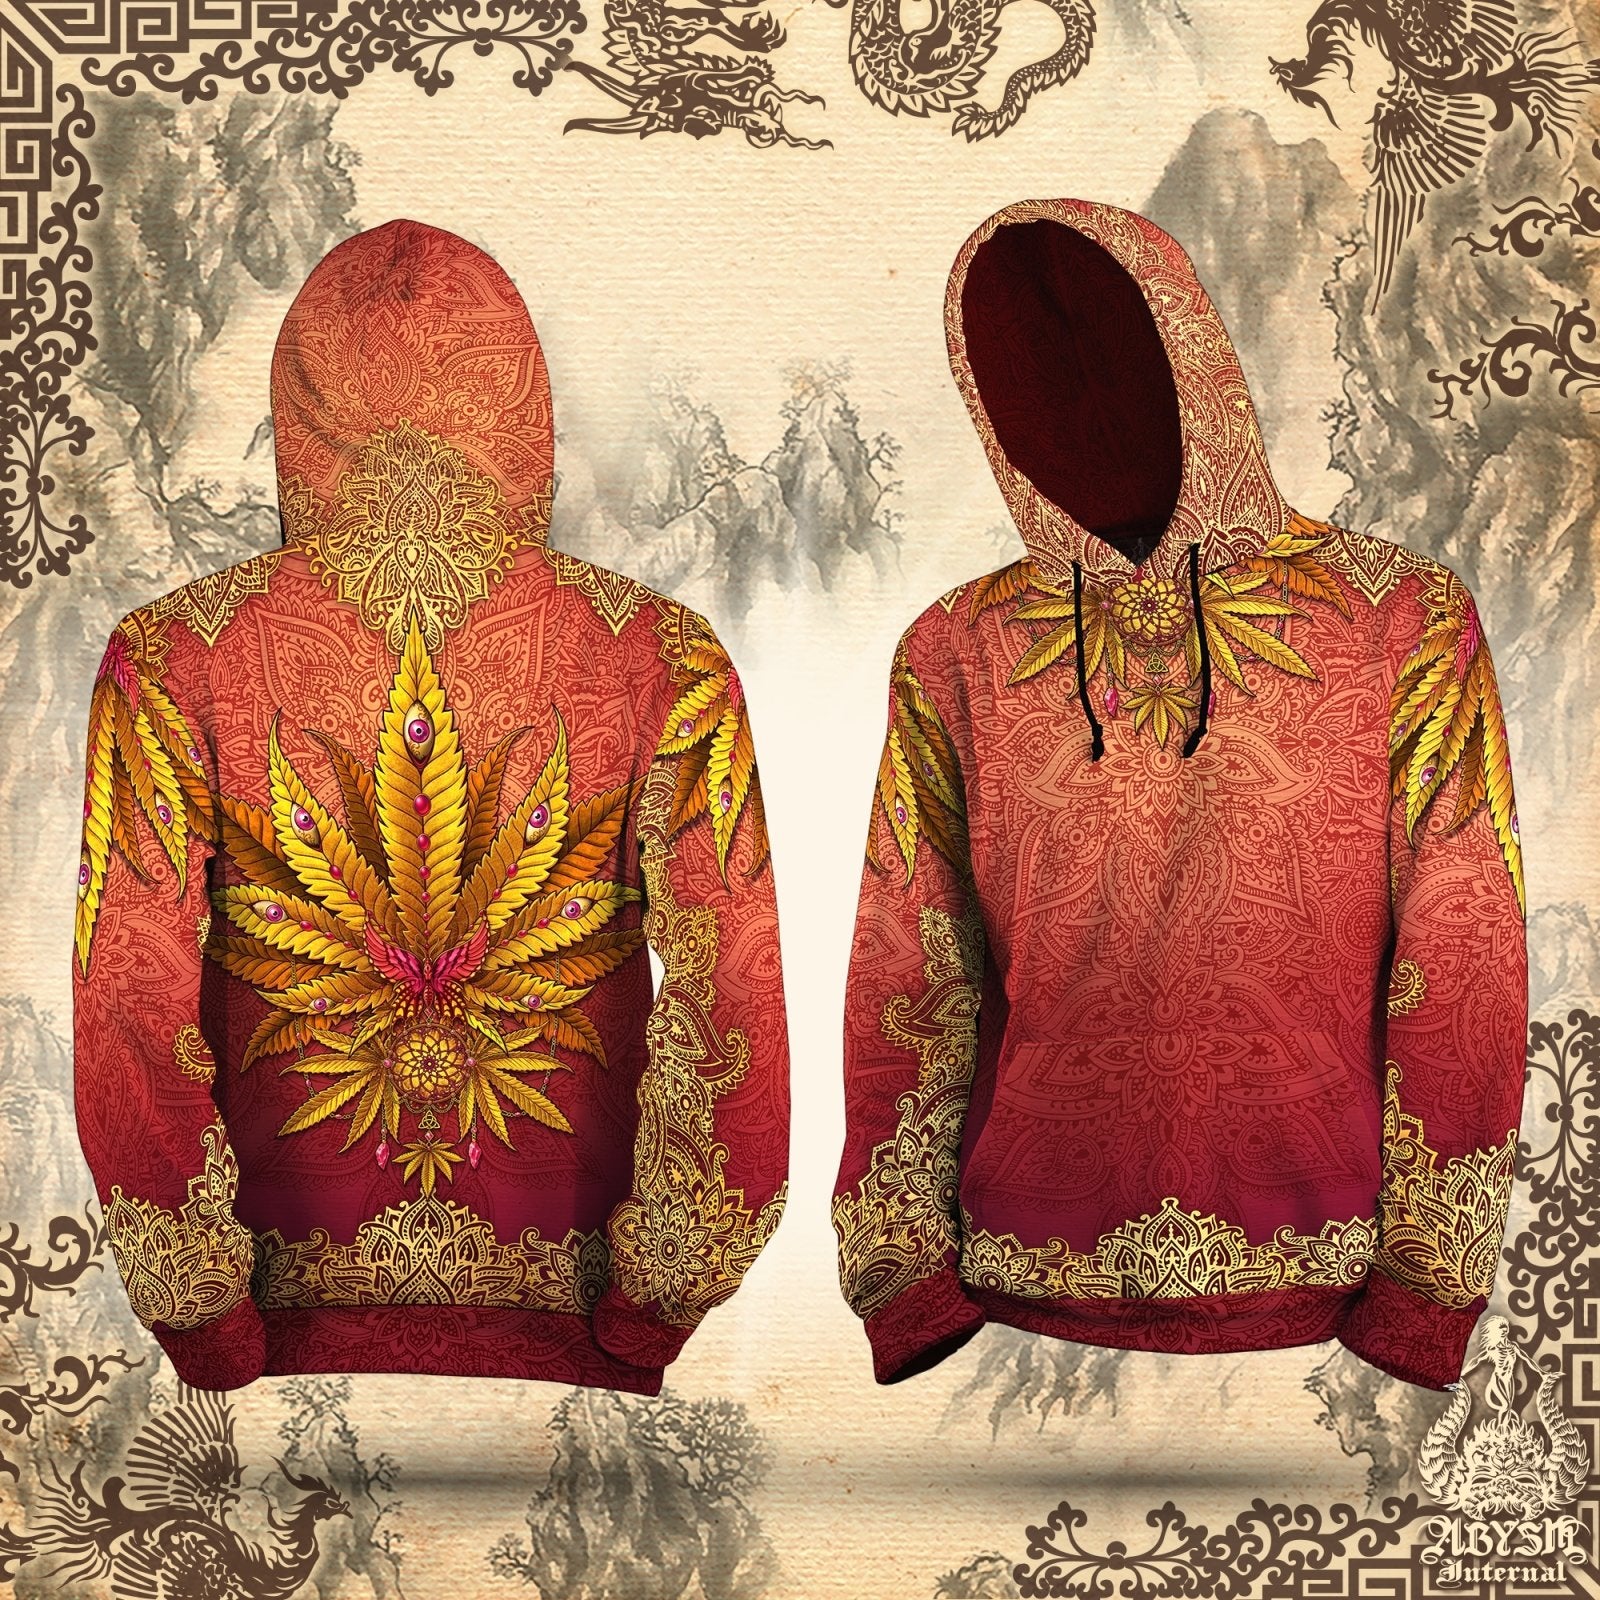 Boho Weed Hoodie, Hippie Clothes, Cannabis Festival Outfit, Trippy Streetwear, Indie and Alternative Clothing, Unisex, 420 Gift - Marijuana, Mandalas - Abysm Internal